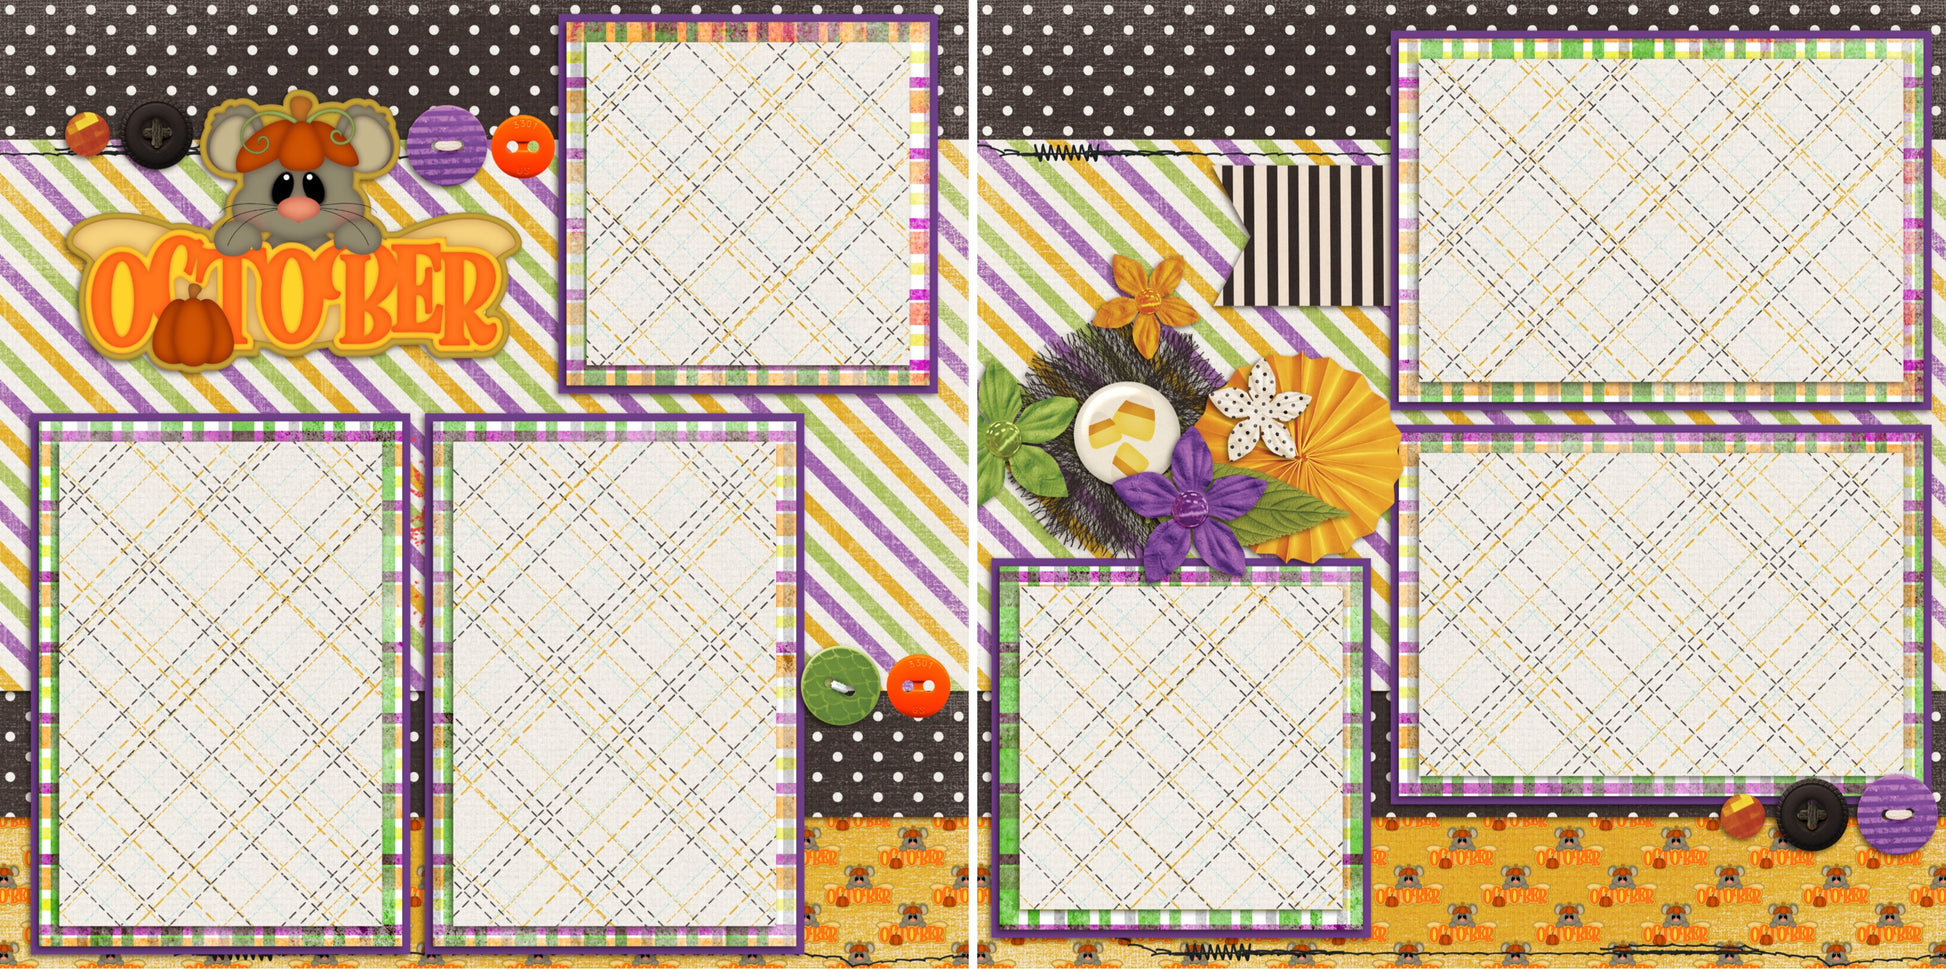 Treasure Box Designs Calendar - 12 Double Page Layouts - 1158 - EZscrapbooks Scrapbook Layouts Months of the Year